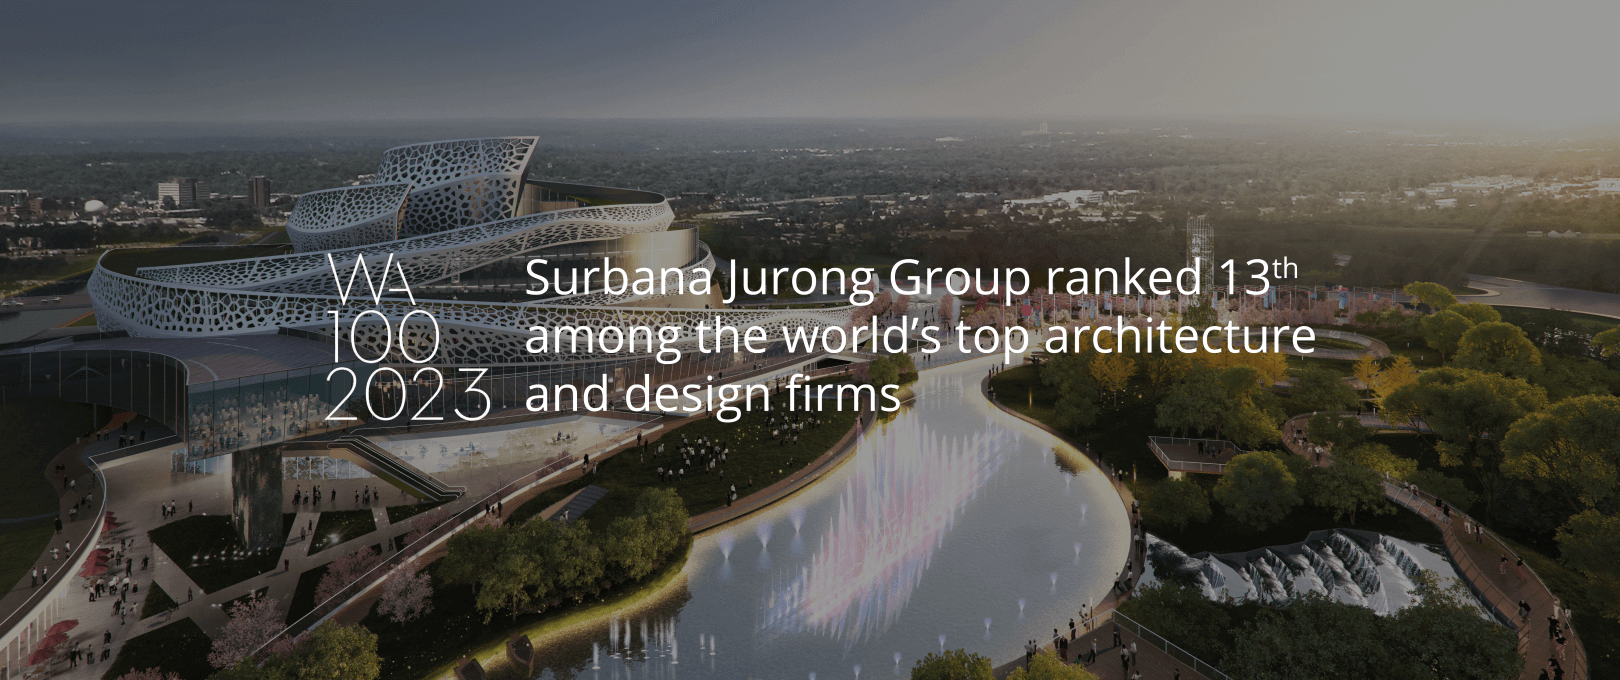 https://surbanajurong.com/resources/news-press-releases/surbana-jurong-group-ranks-13th-among-architecture-firms-globally/